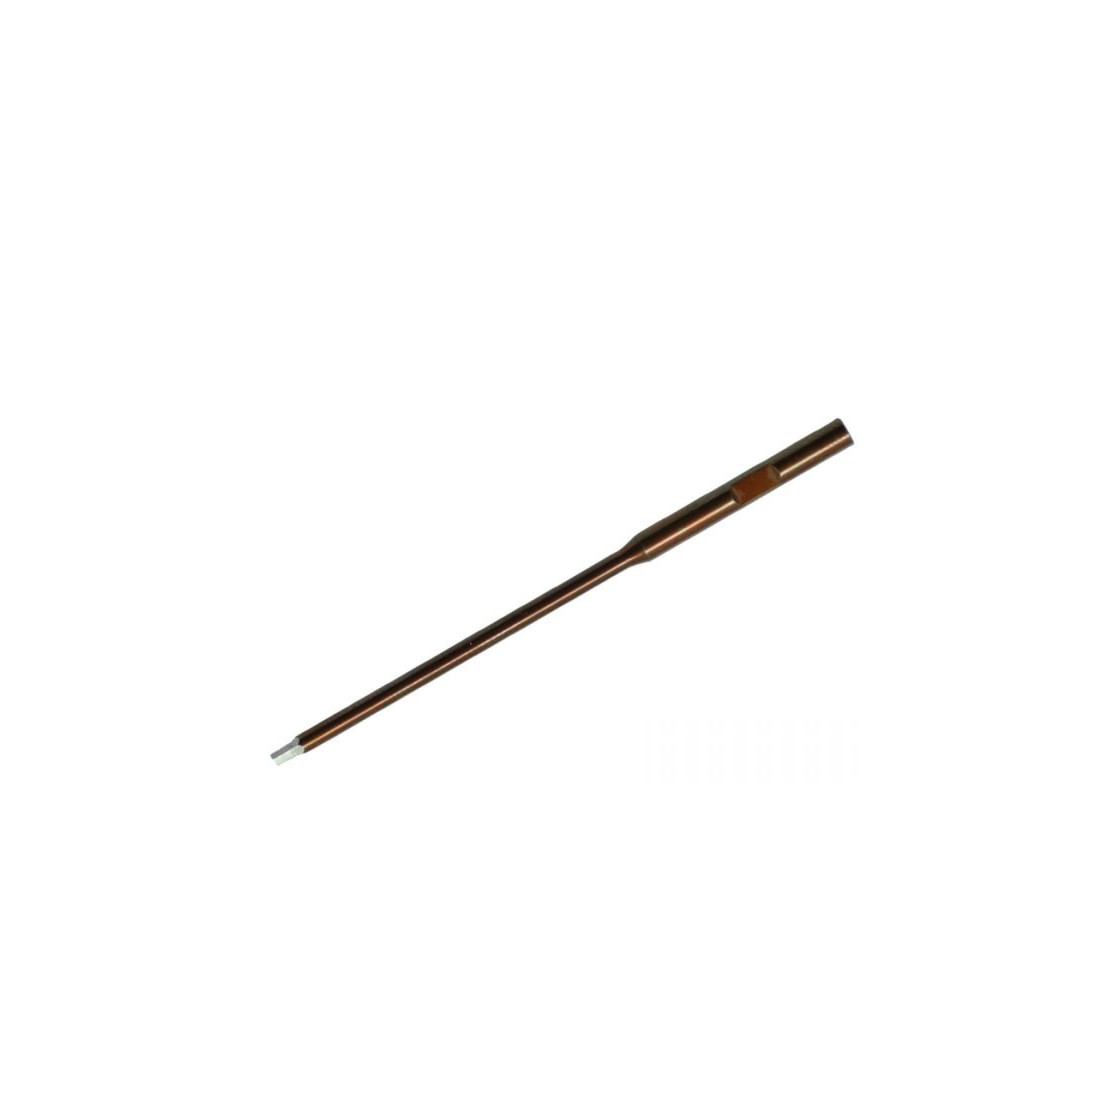 ALLEN WRENCH .050 X 60MM TIP ONLY